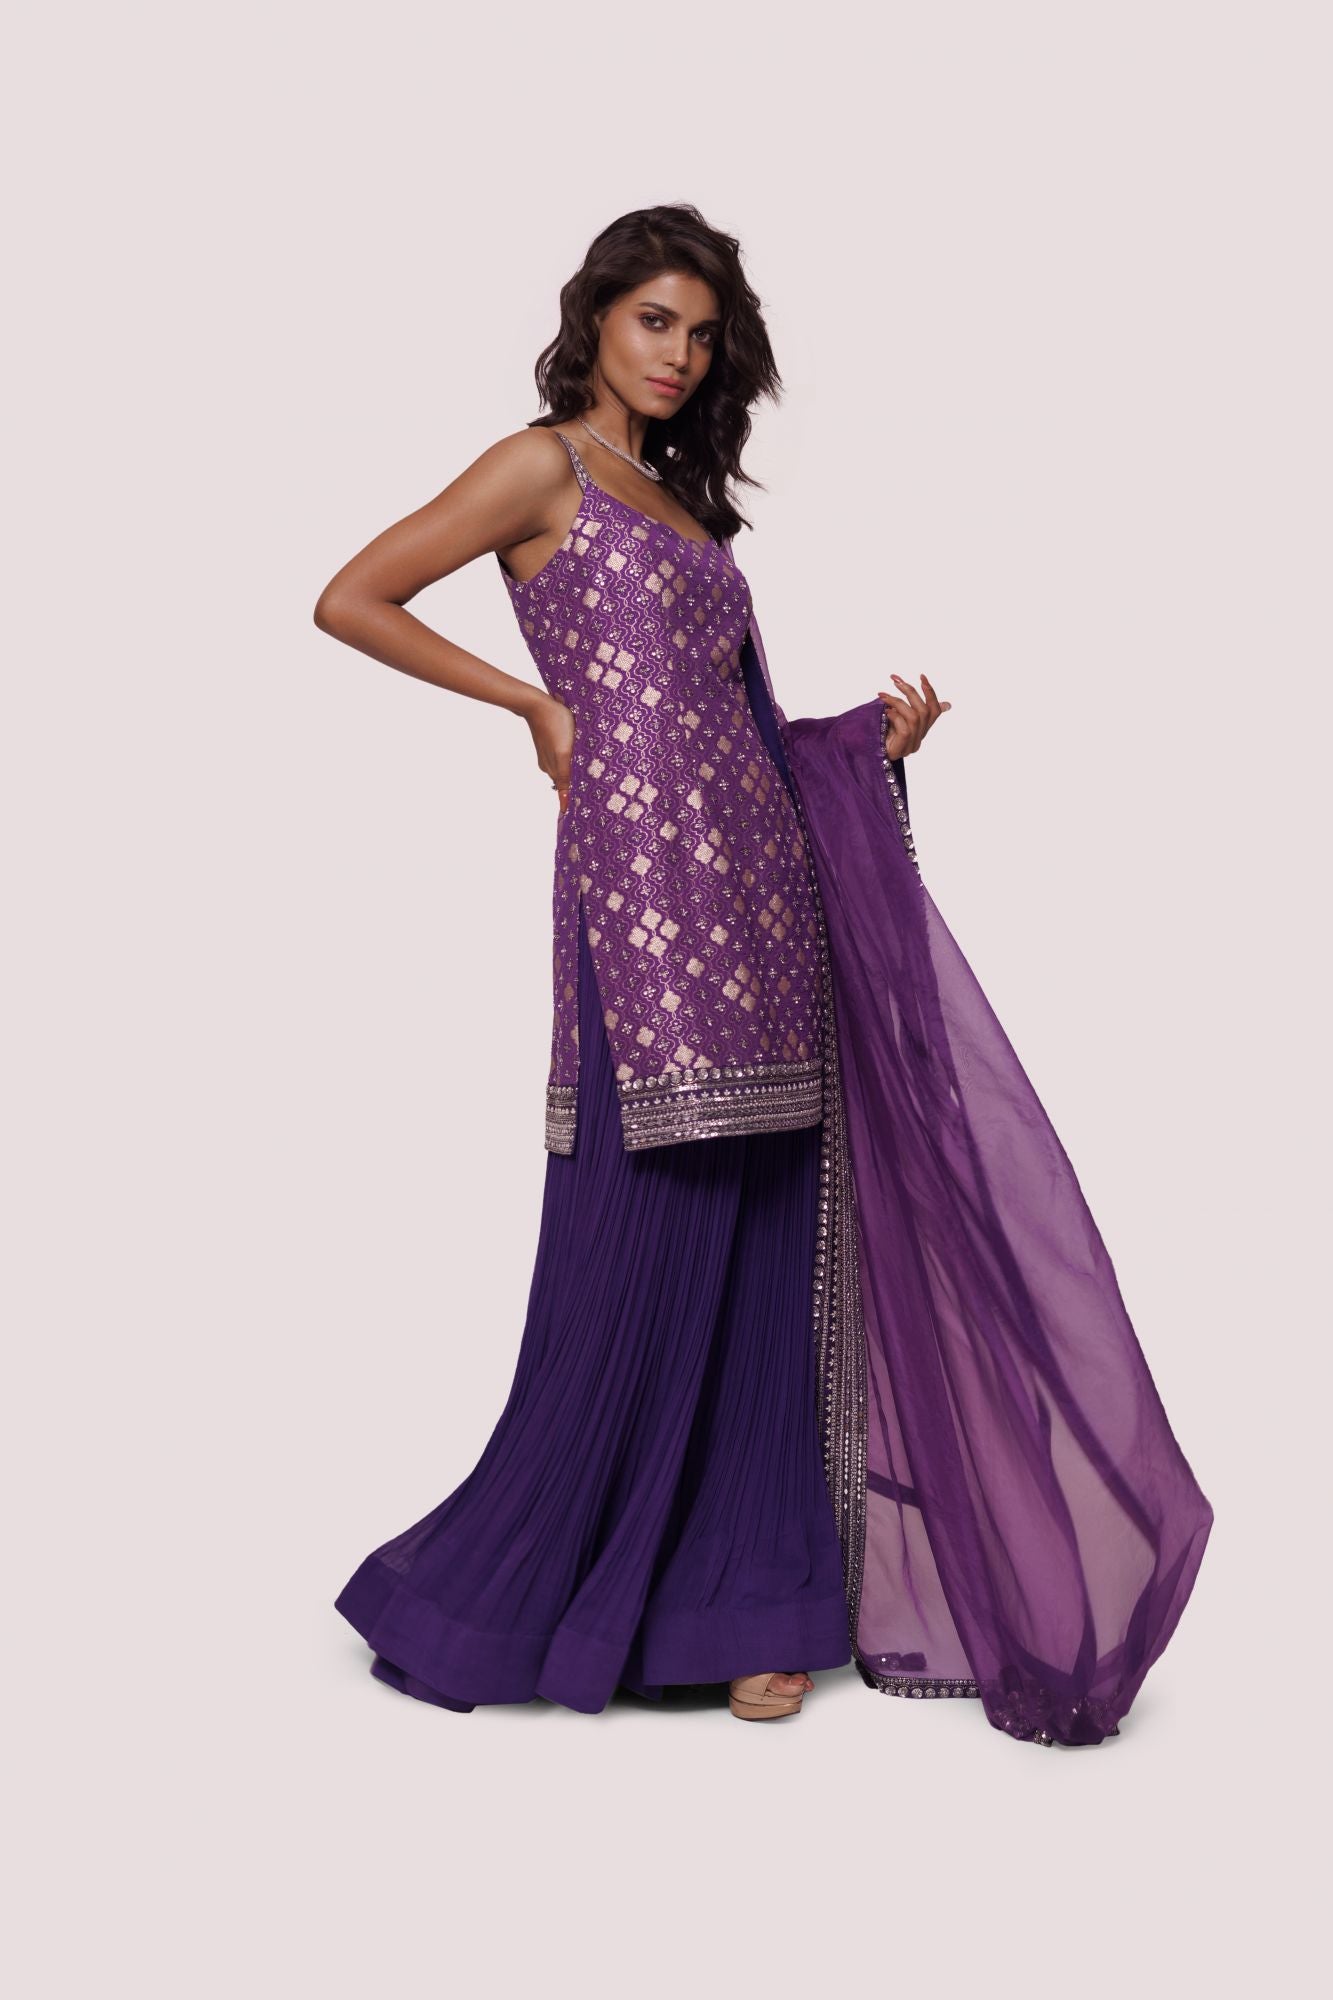 Buy a purple brocade kurta set with georgette sharara and narrow sleeves with sequin mirror embroidery. Dazzle on weddings and special occasions with exquisite Indian designer dresses, sharara suits, Anarkali suits, and wedding lehengas from Pure Elegance Indian fashion store in the USA.